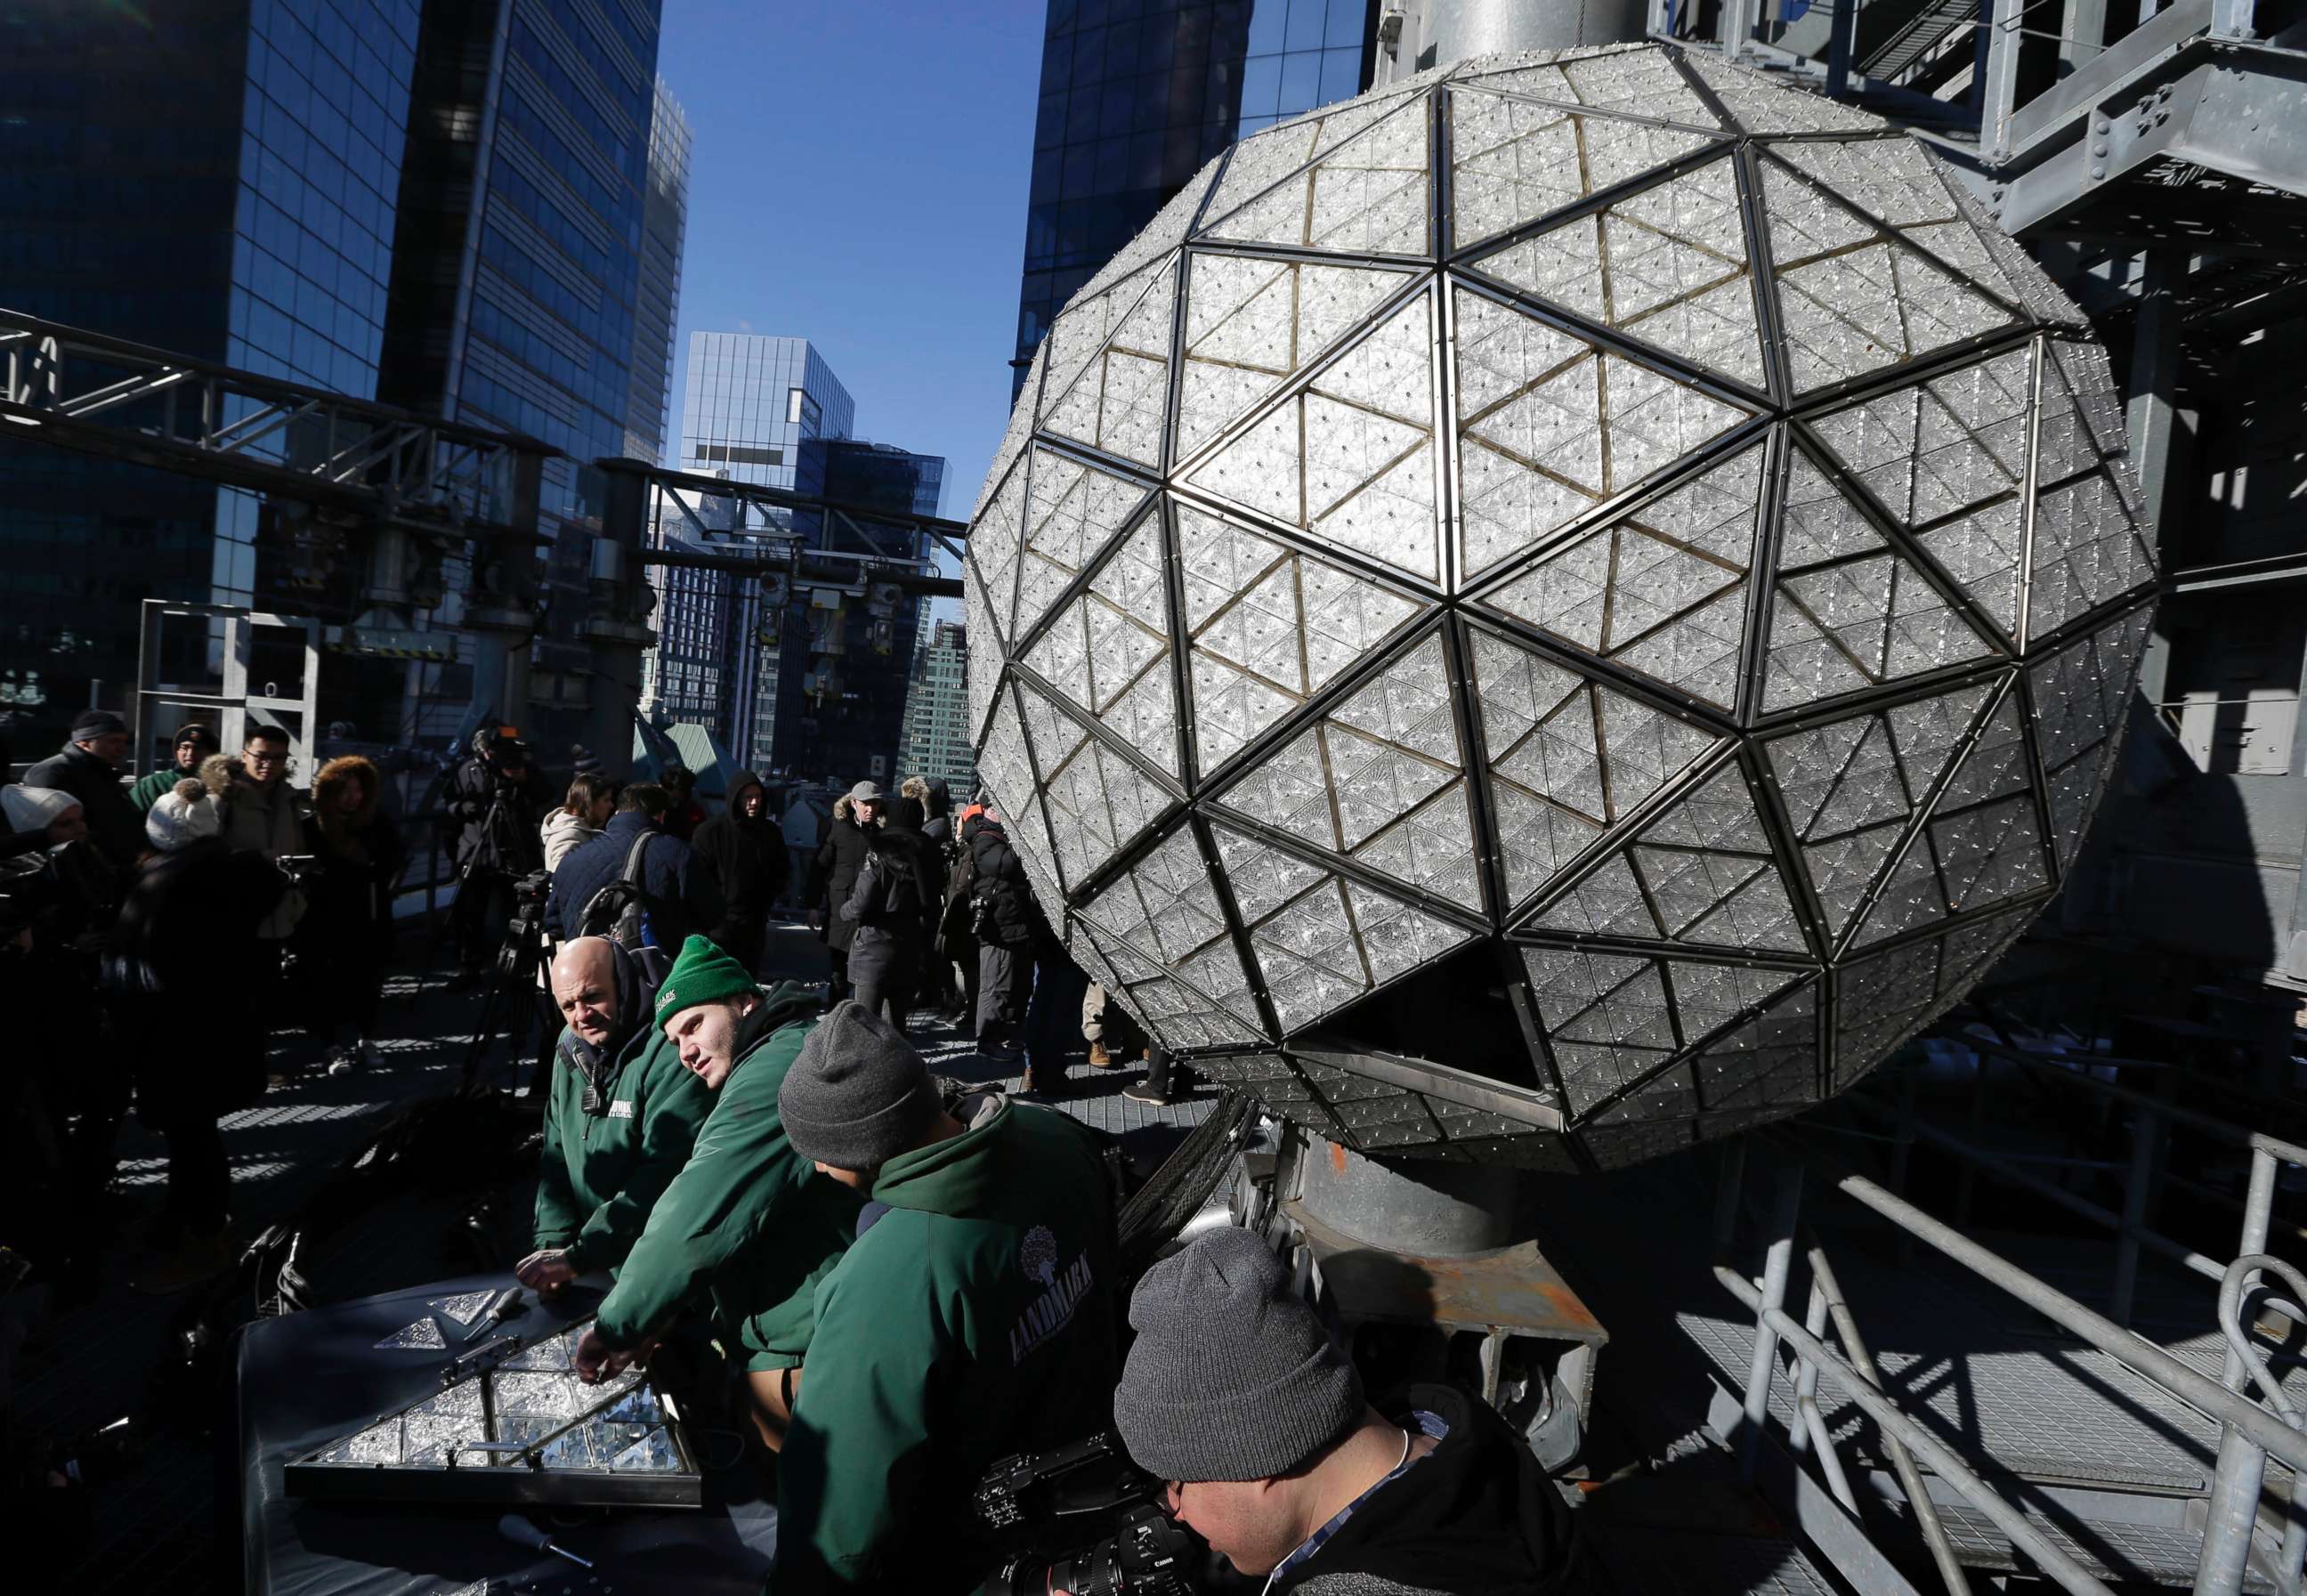 PHOTO: Workers prepare to install the last panels on the New Year's Eve ball above Times Square, New York, Dec. 27, 2017.